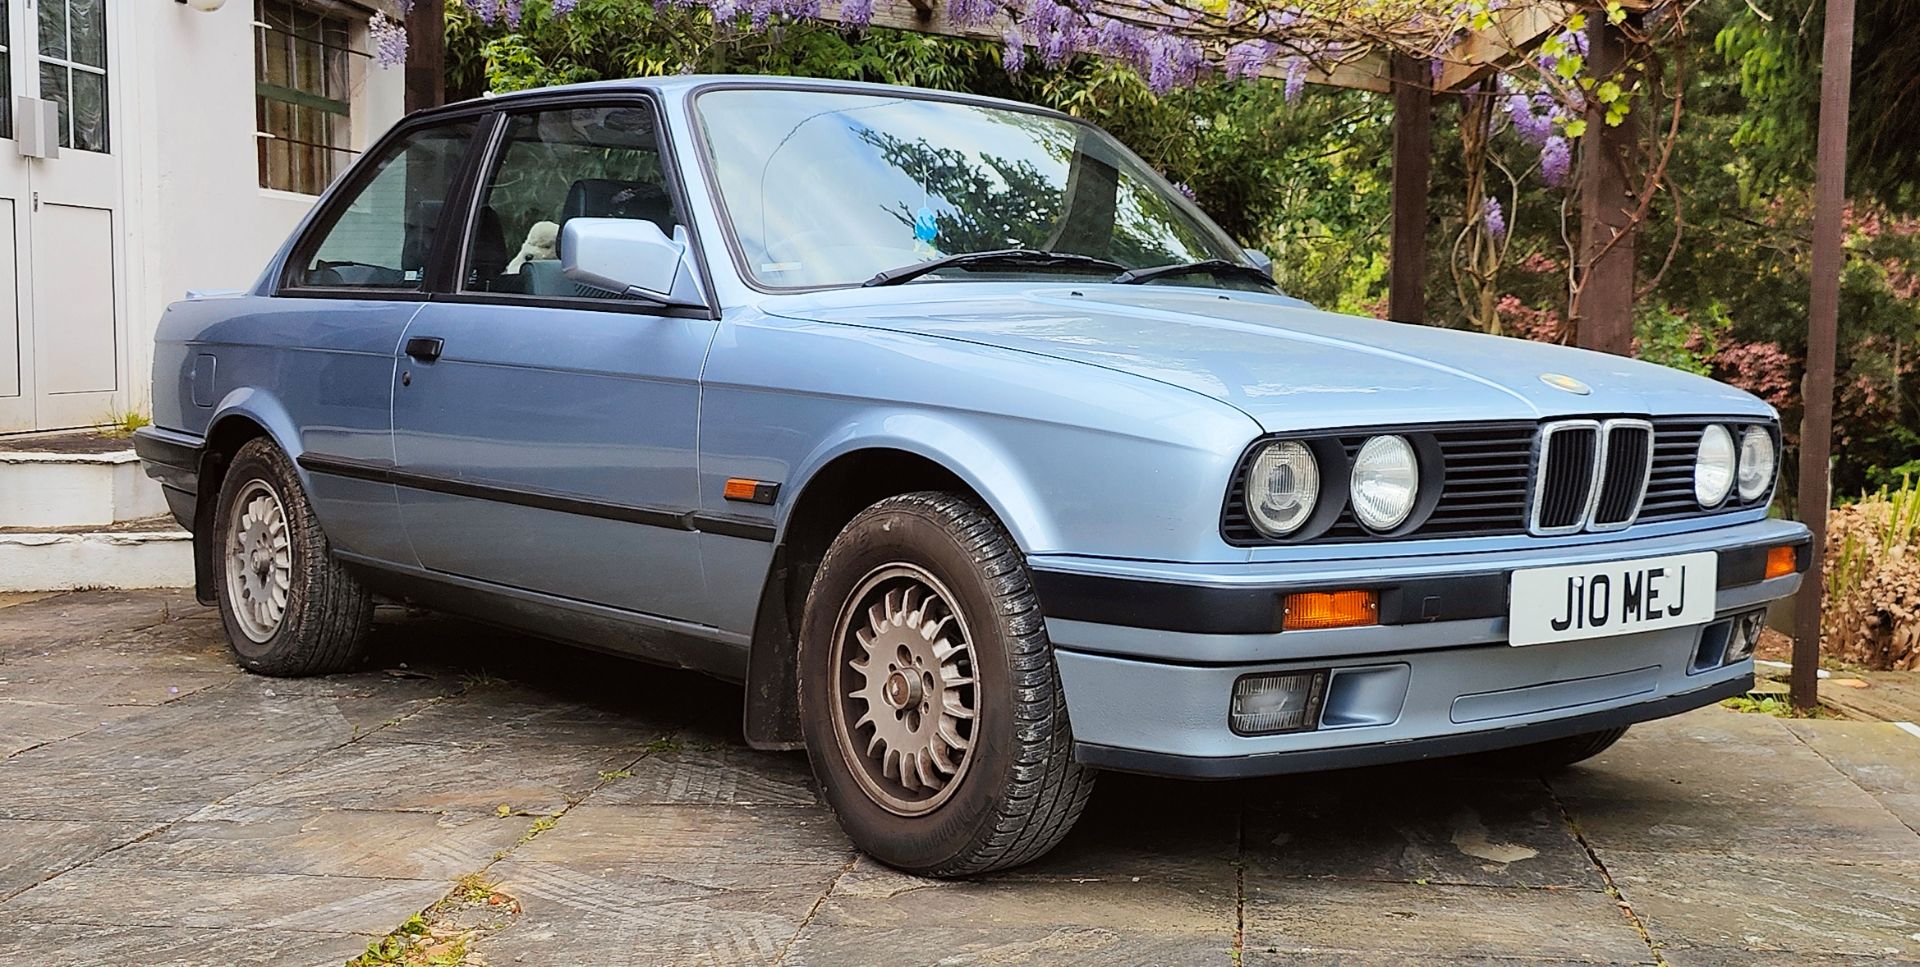 1991 BMW 316i 1600CC 4DR SALOON - WITH PRIVATE PLATE J10MEJ - Image 2 of 22